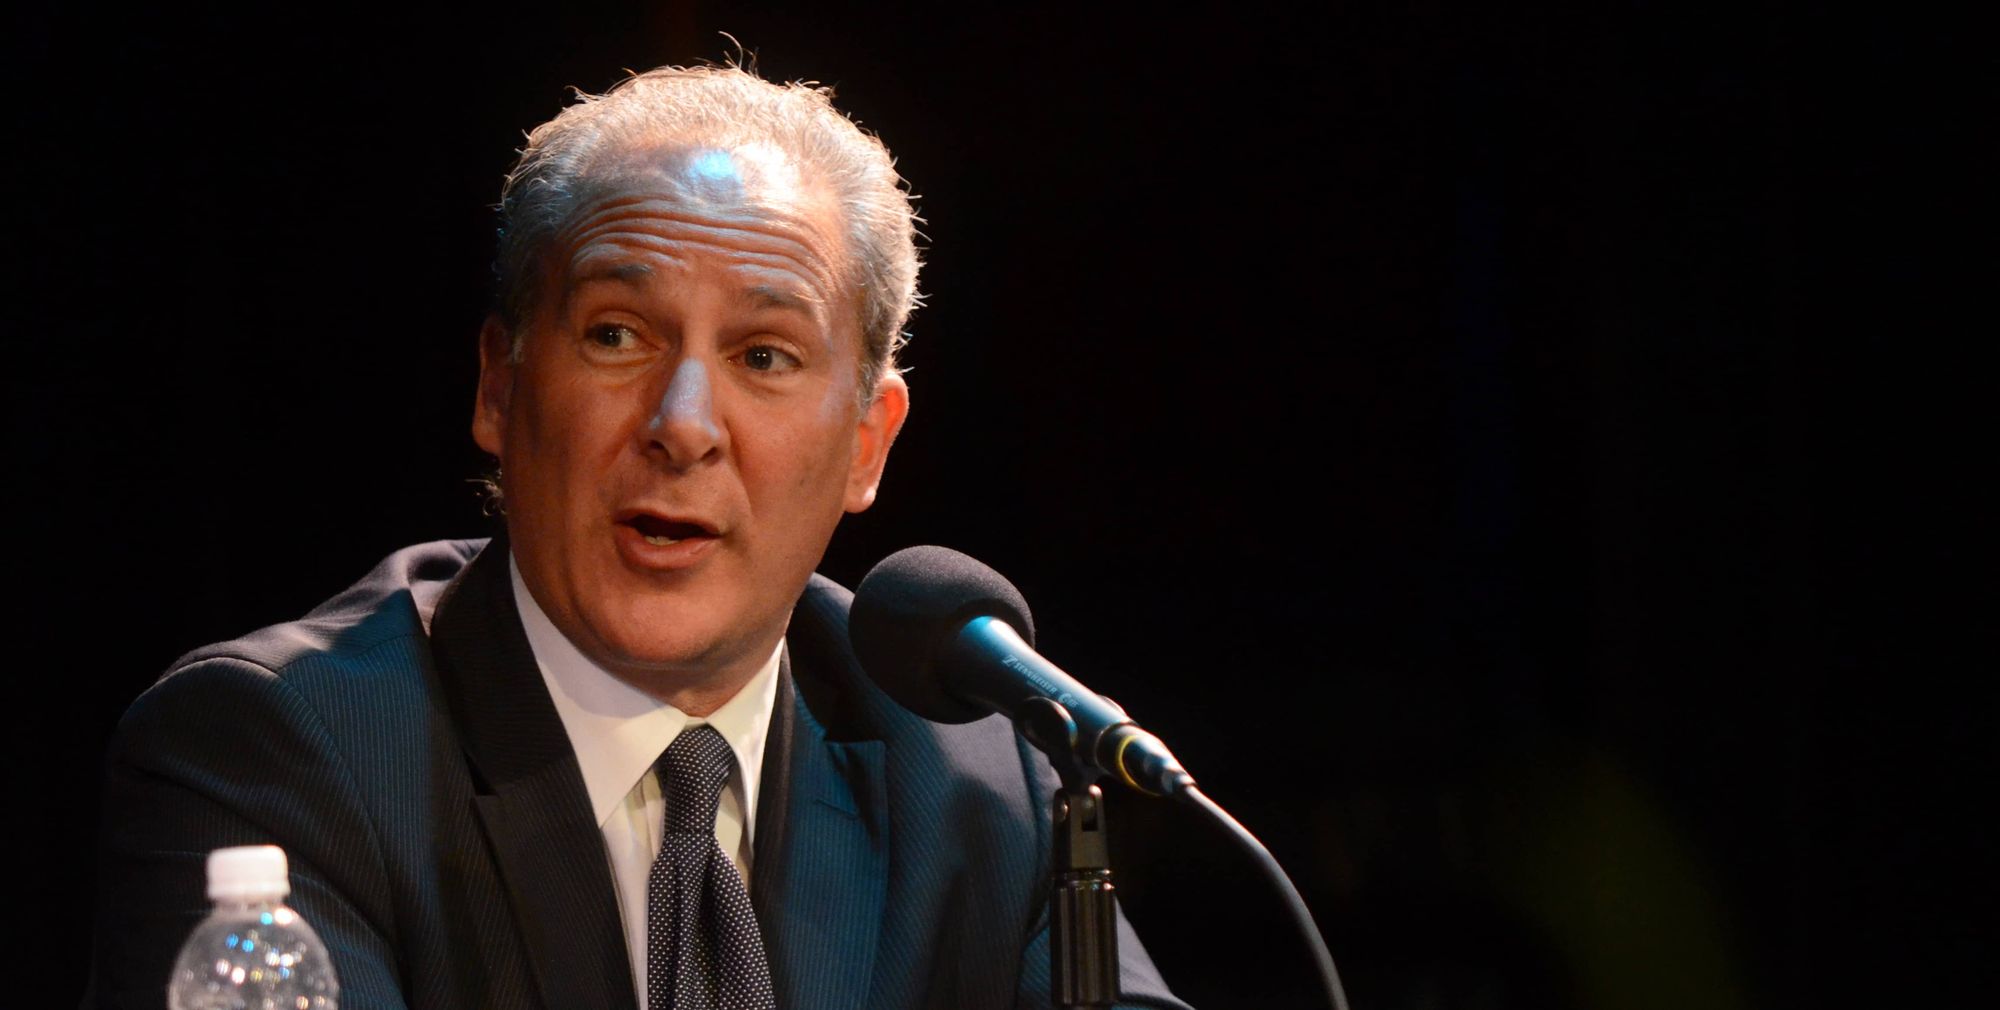 Peter Schiff Files Bankruptcy After Bitcoiners Stop Engaging With His Tweets